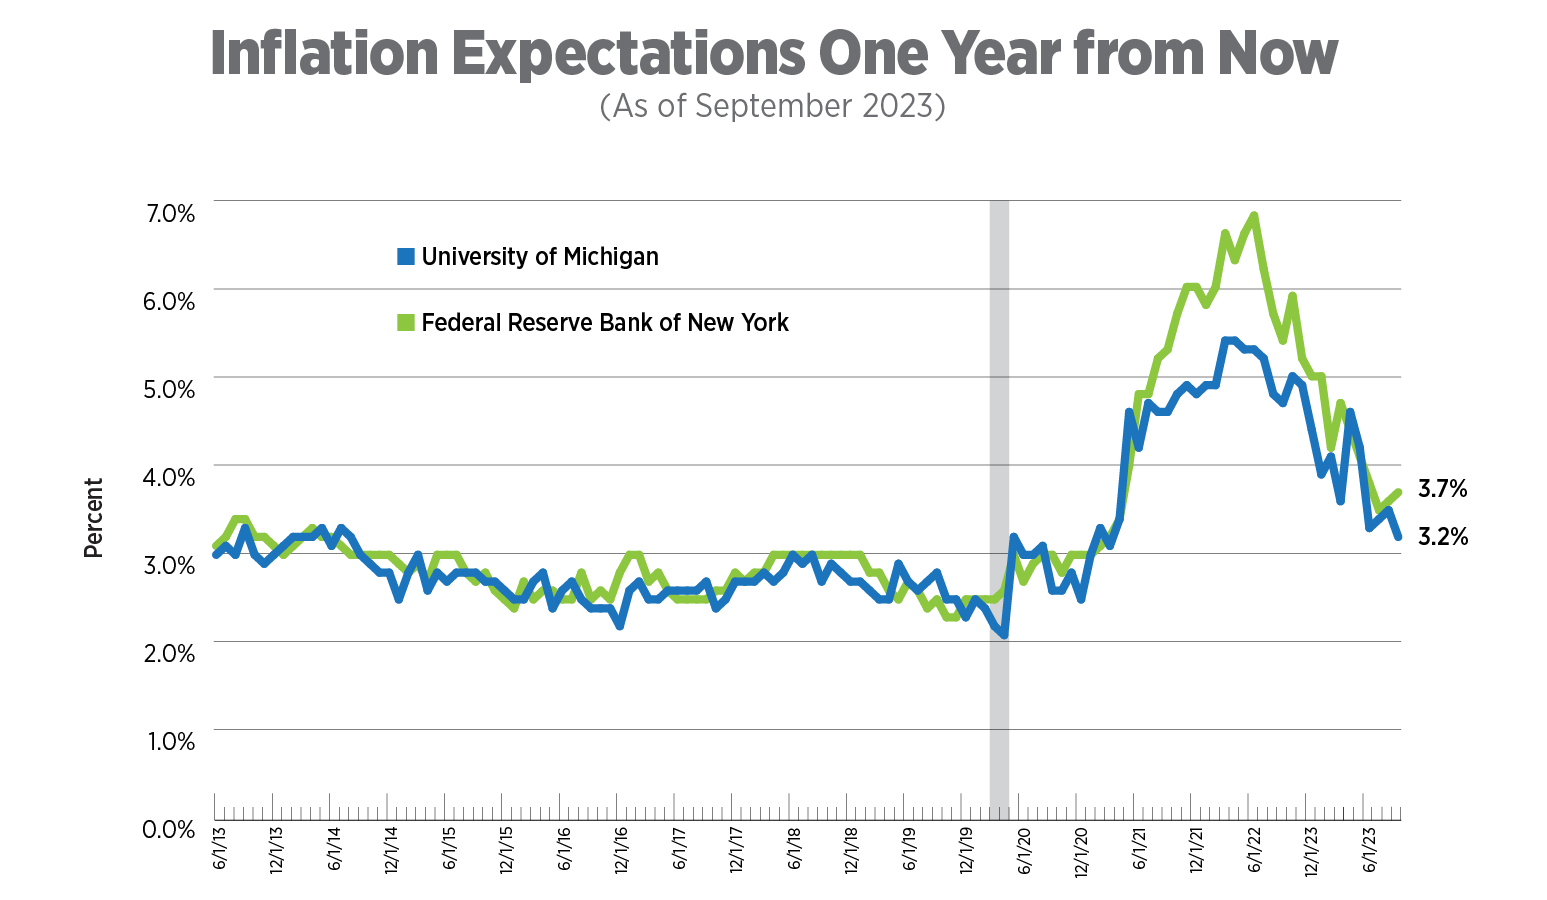 inflation expectations one year from now, as of september 2023